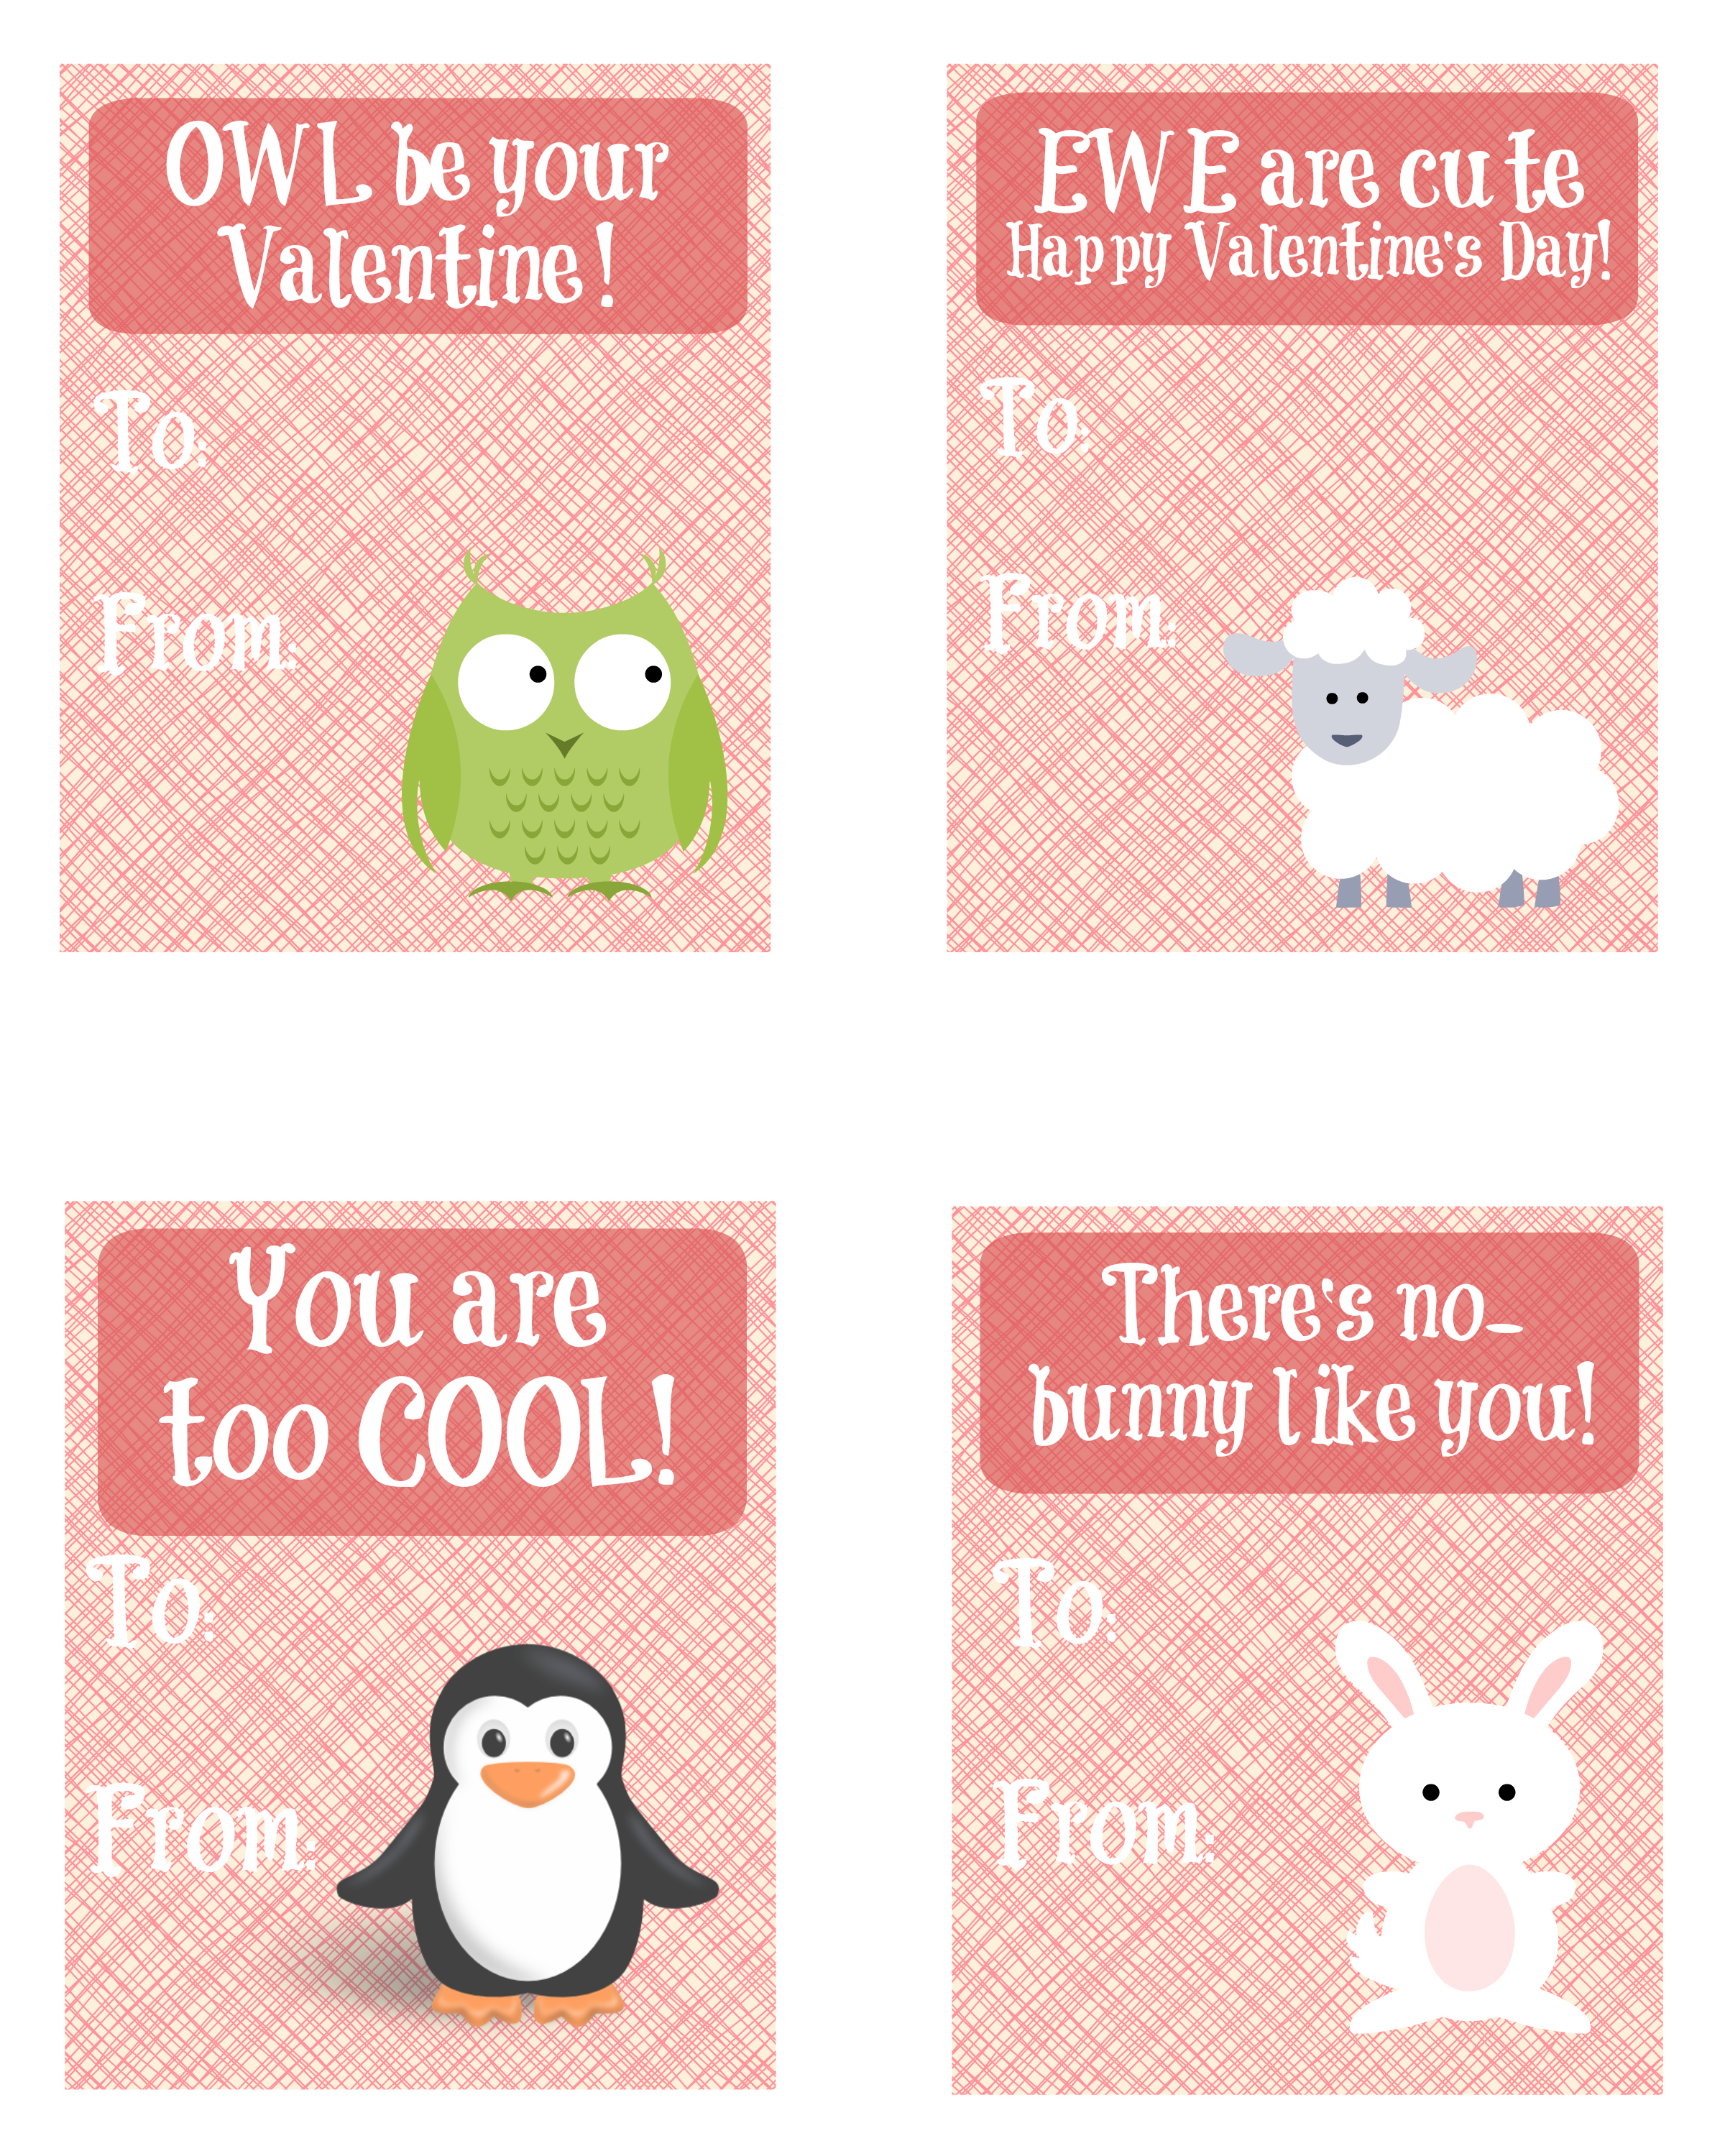 Valentines Day Printable Cards